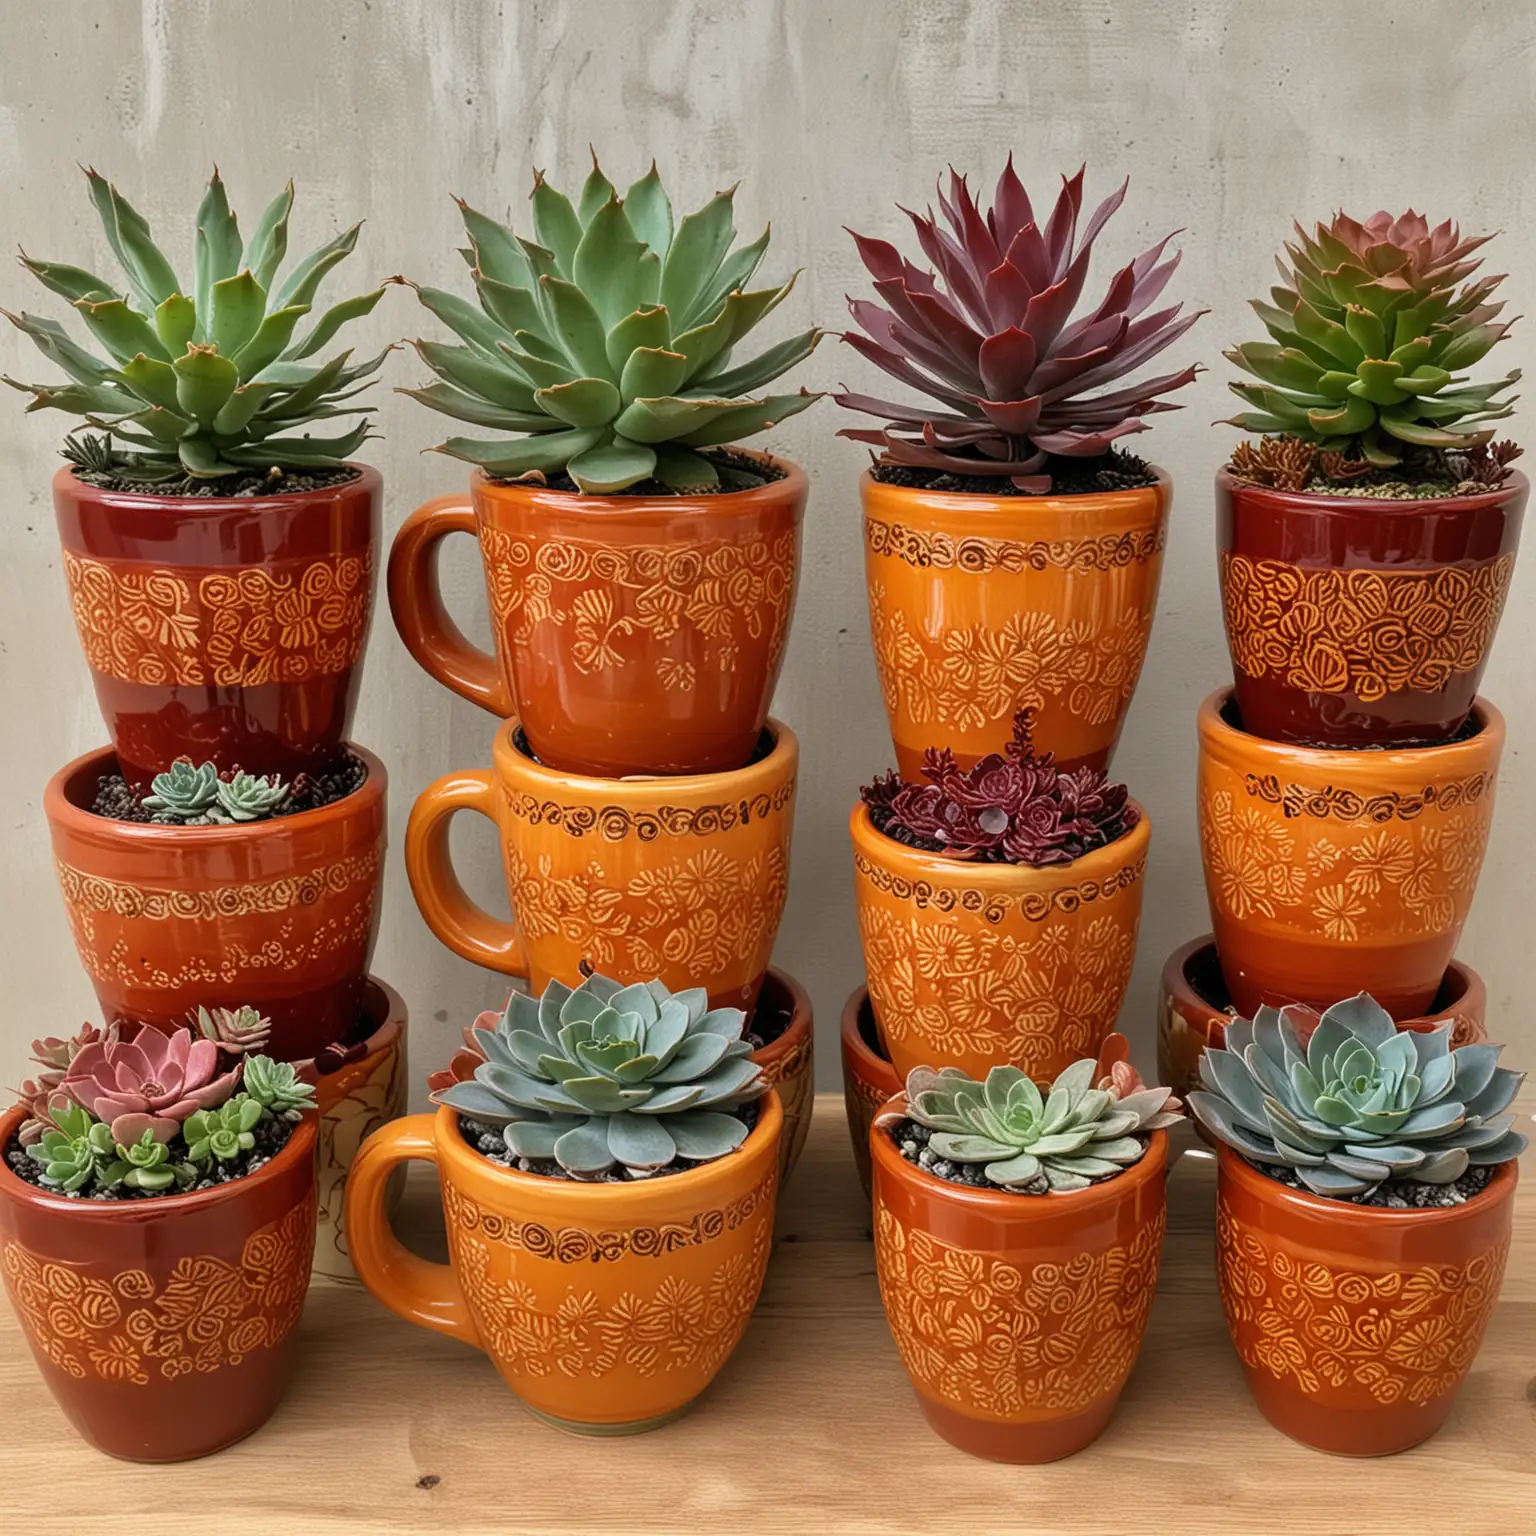 a collection of very large traditional looking coffee cups used as a vase, painted in solid, rich colors:  dark burgundy, bold gold, burnt orange or pumpkin orange; each coffee cup is only painted in one of those colors and there are no designs on the coffee cups; each coffee cup is filled with succulents